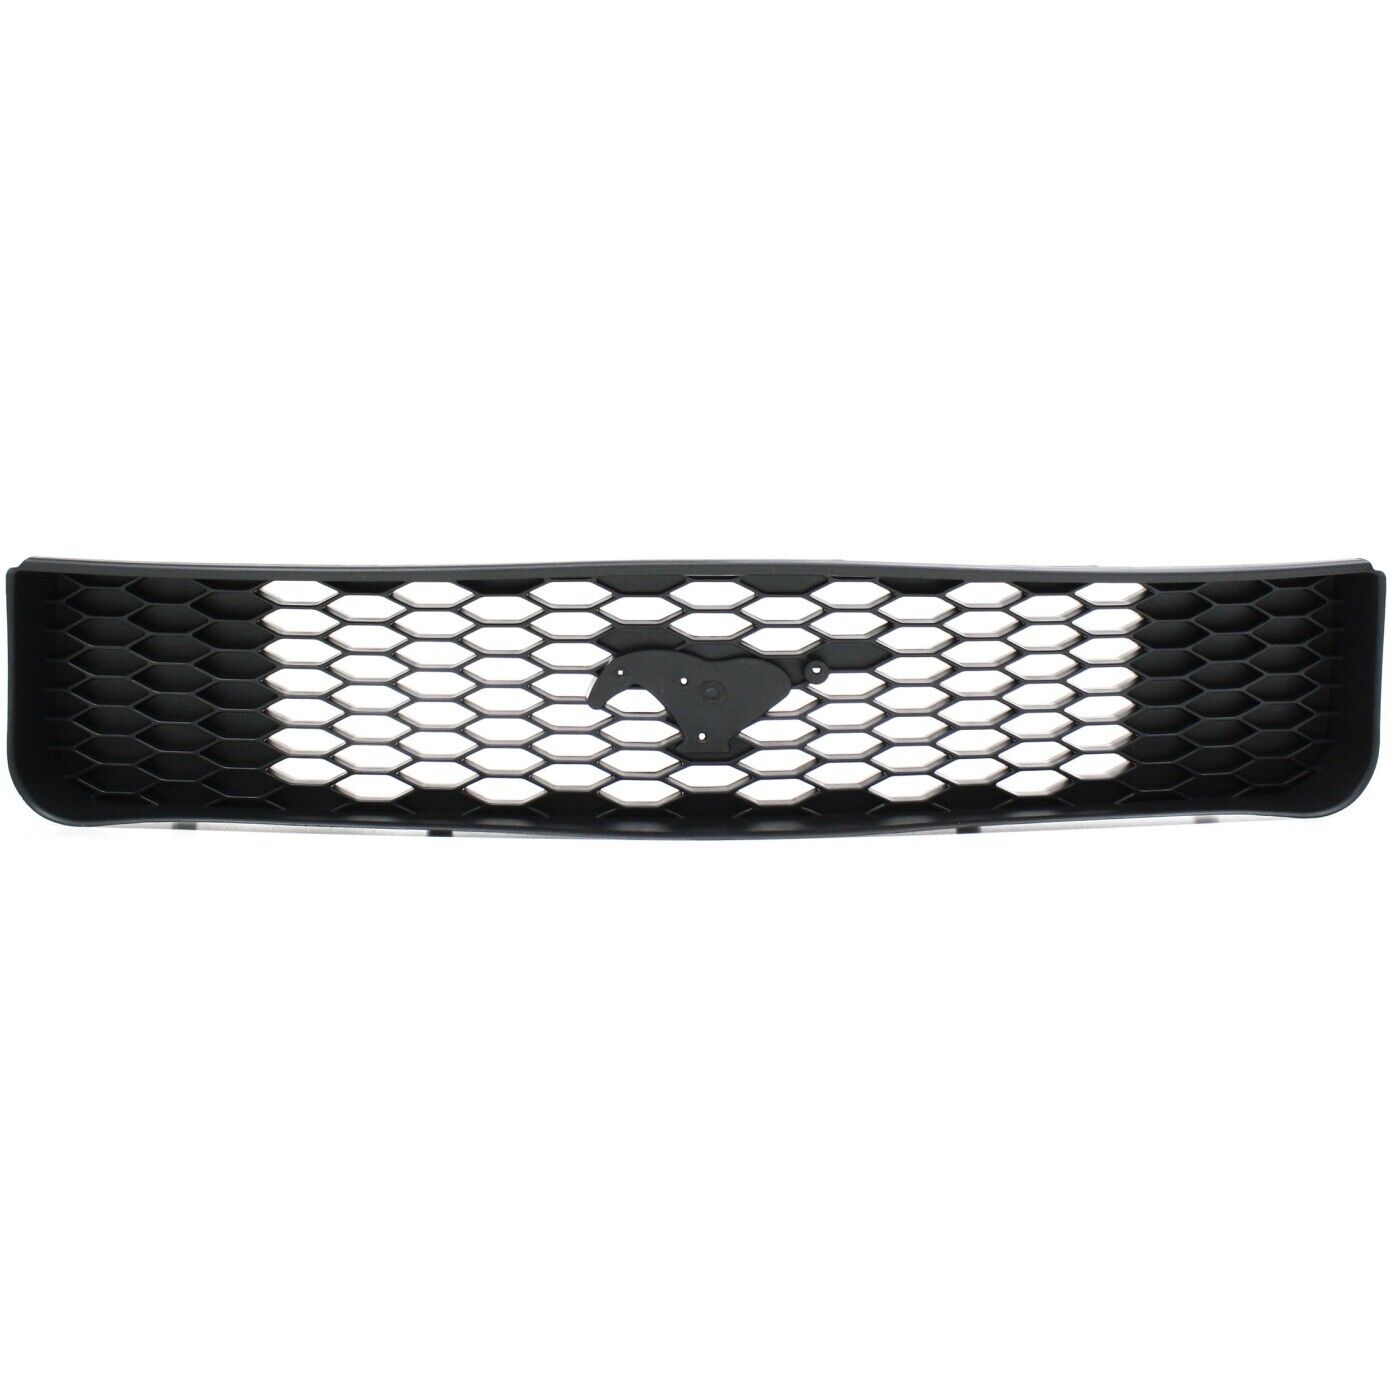 Grille For 2005-2009 Ford Mustang Black Plastic